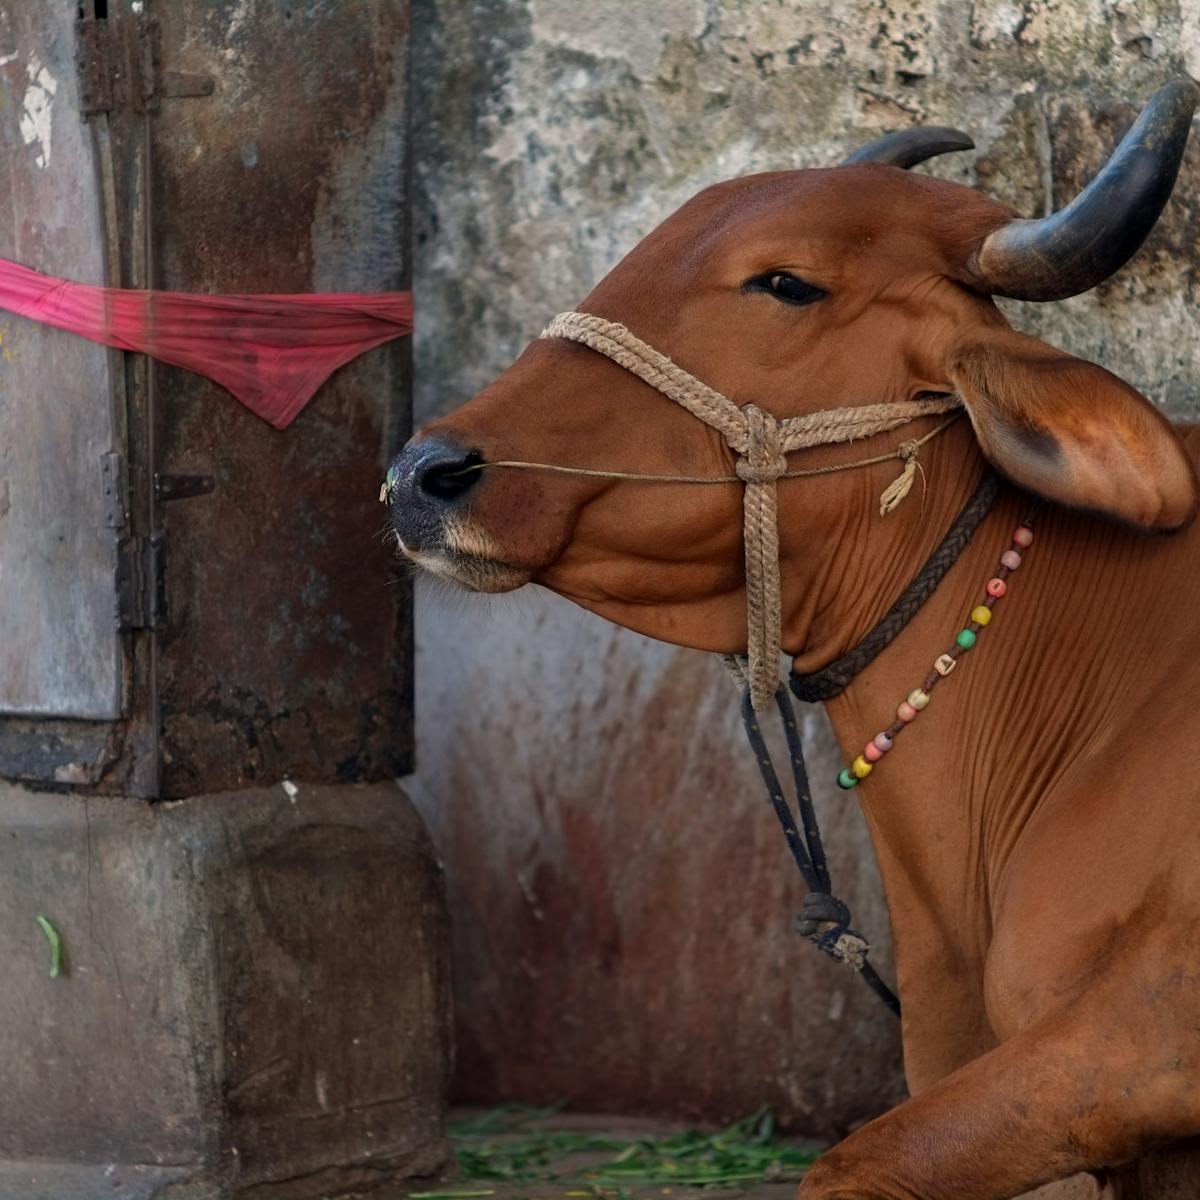 Hinduism and its complicated history with cows (and people who eat them)